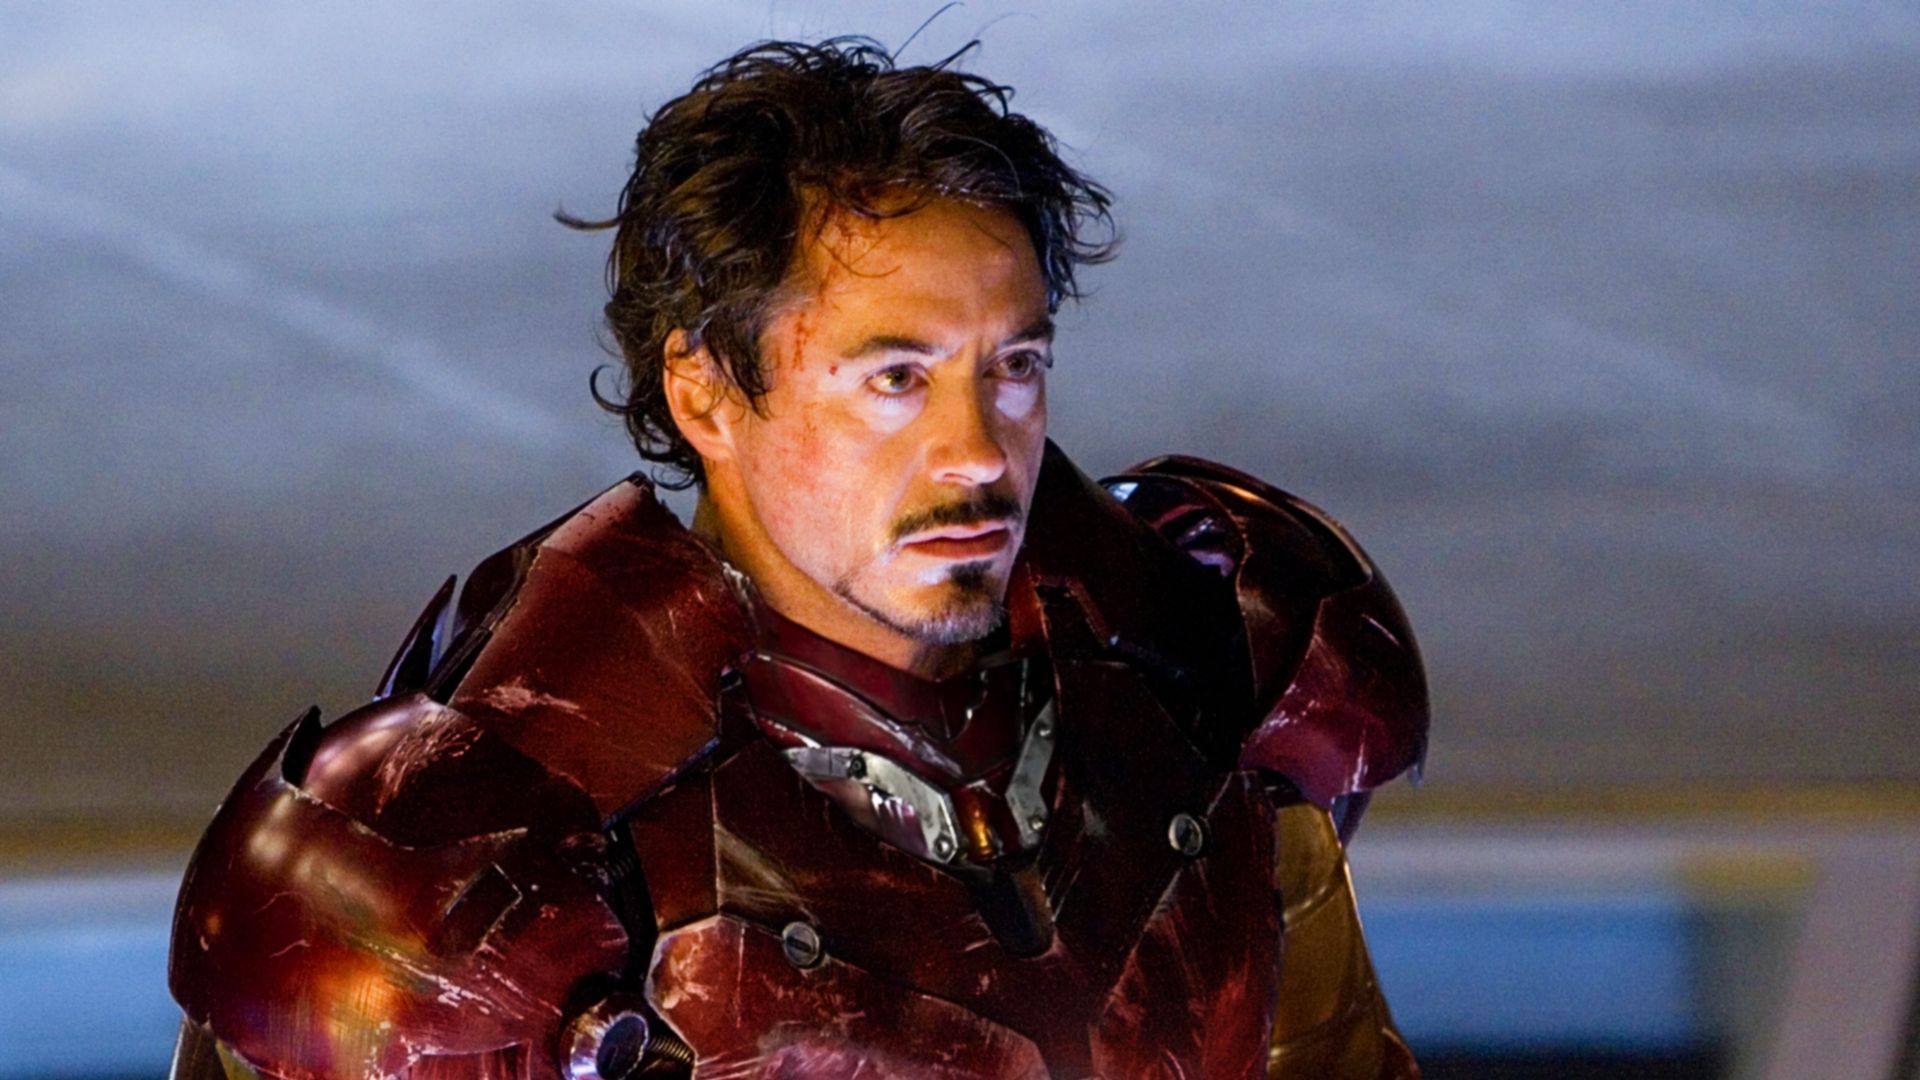 12 Scenes That Prove Tony Stark Had The Best Character Arc in the MCU